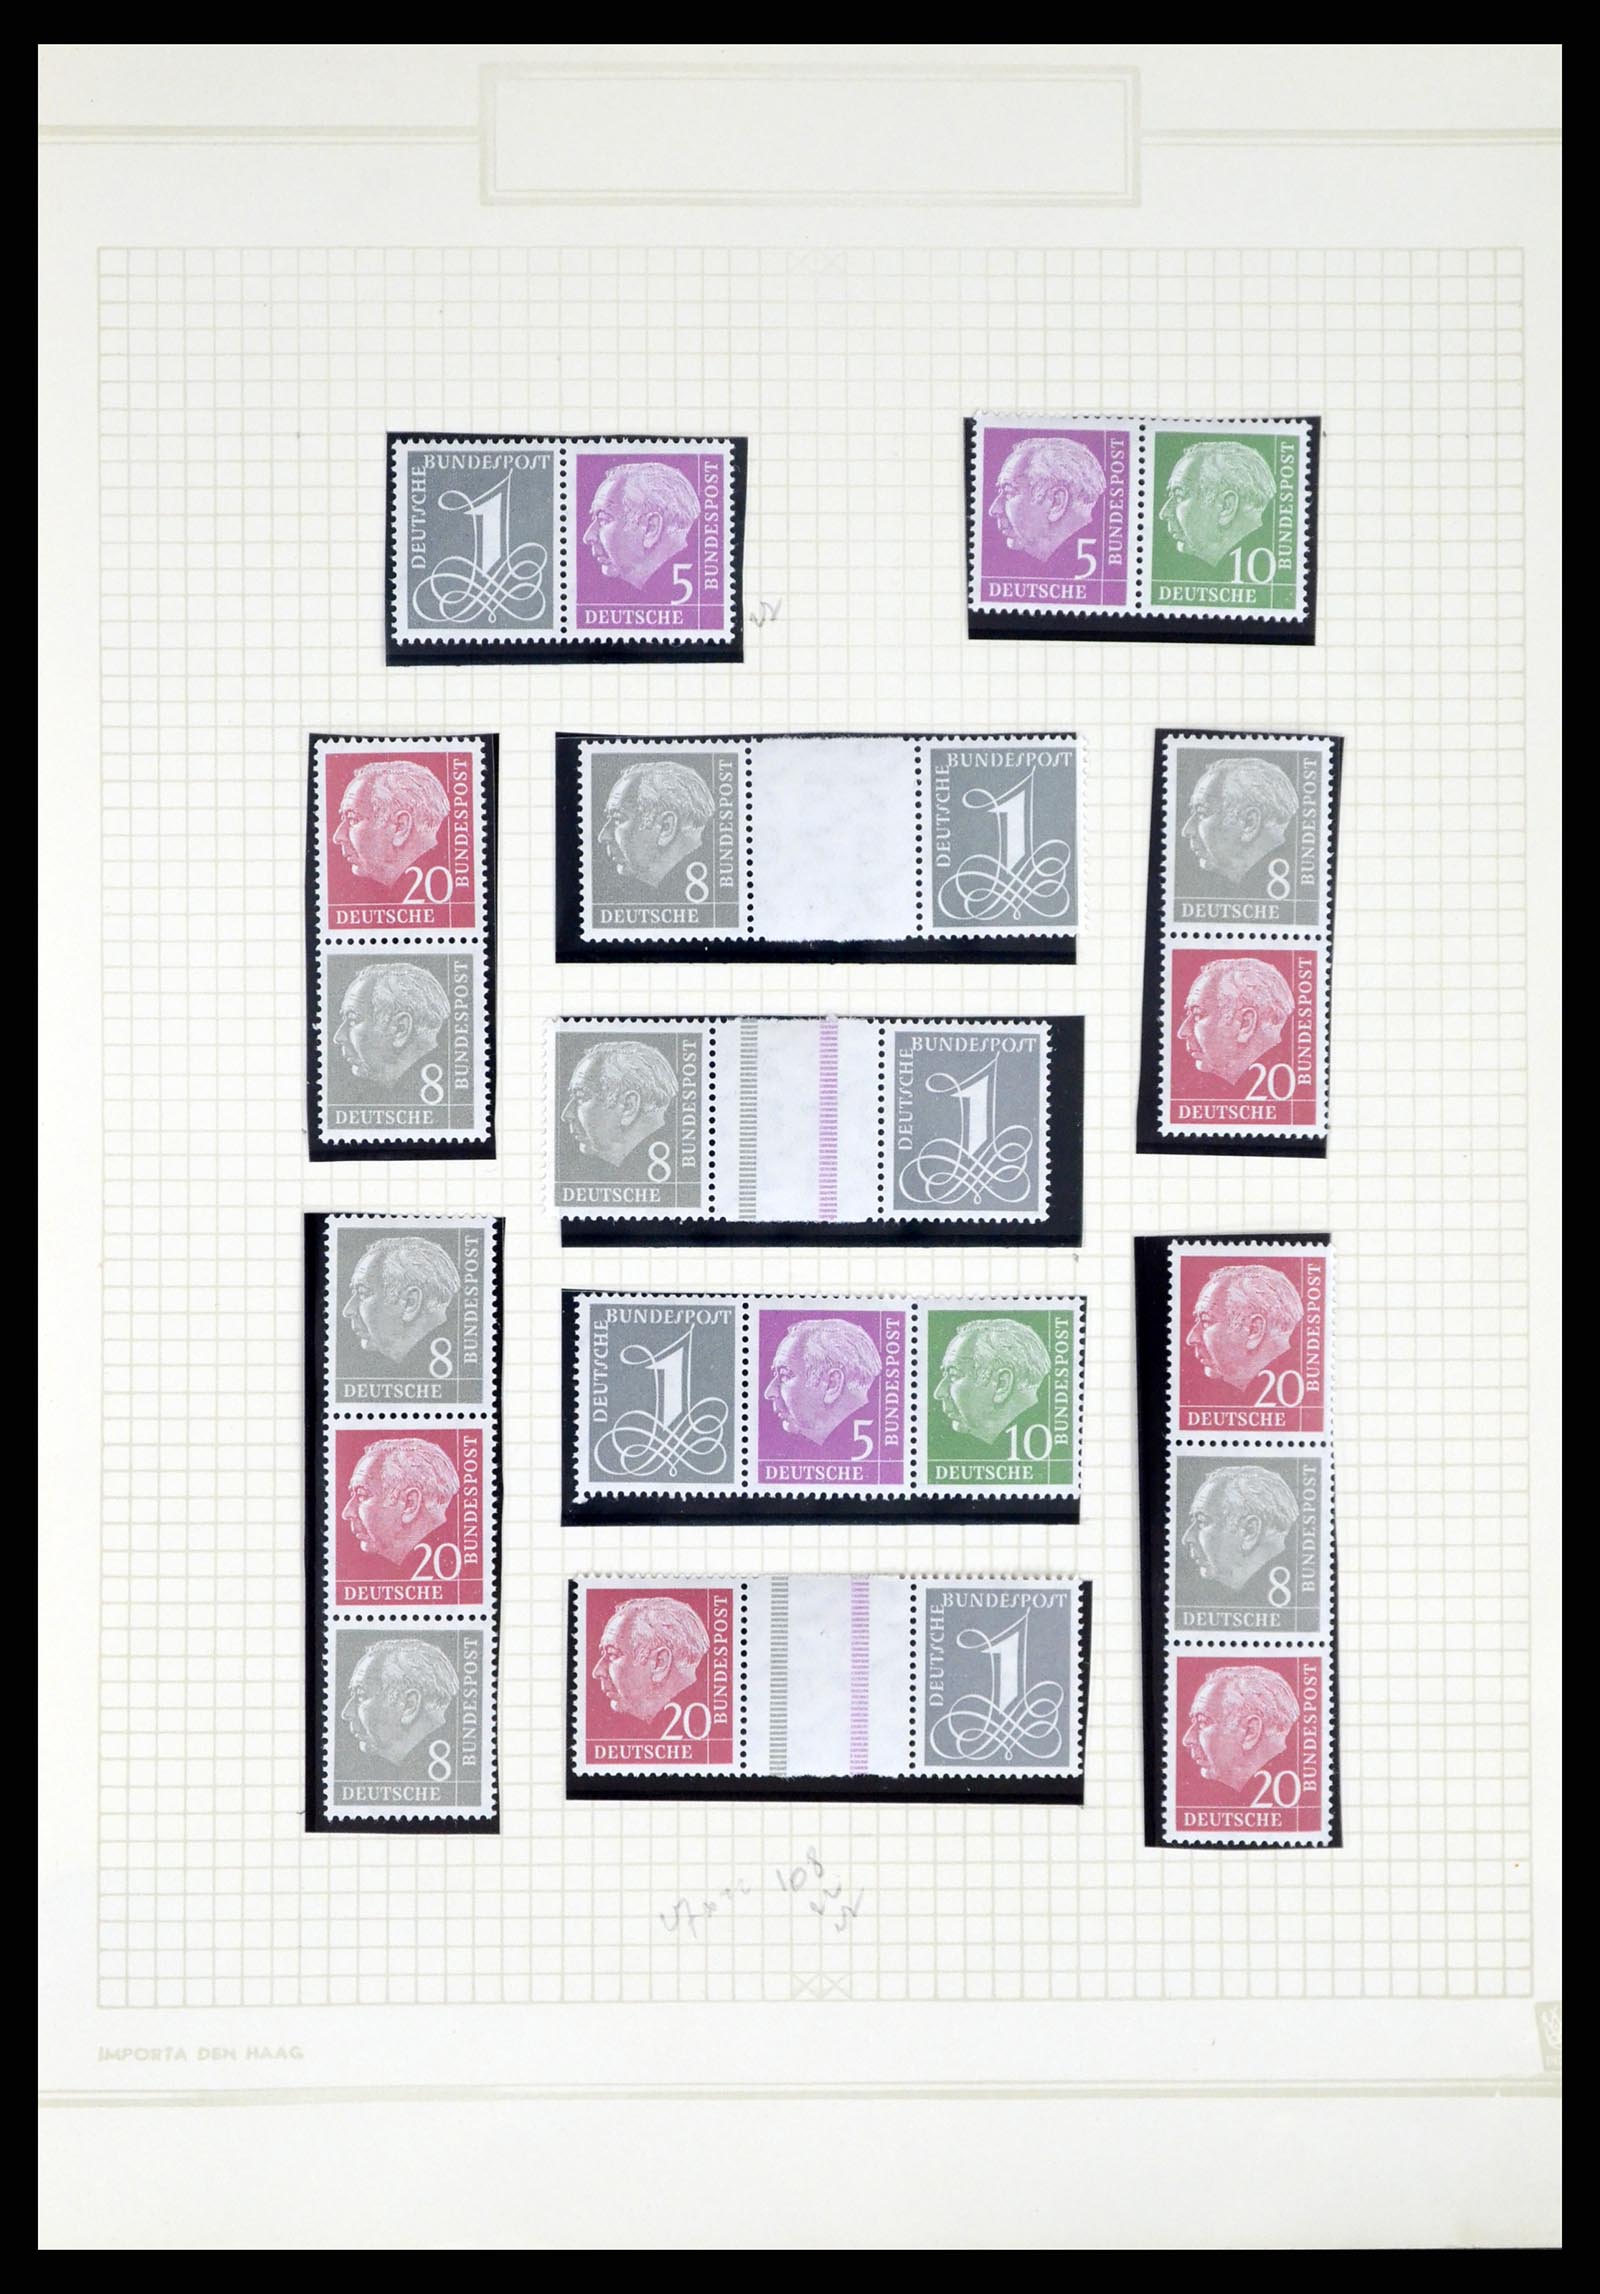 37354 049 - Stamp collection 37354 Bundespost and Berlin 1955-2000.